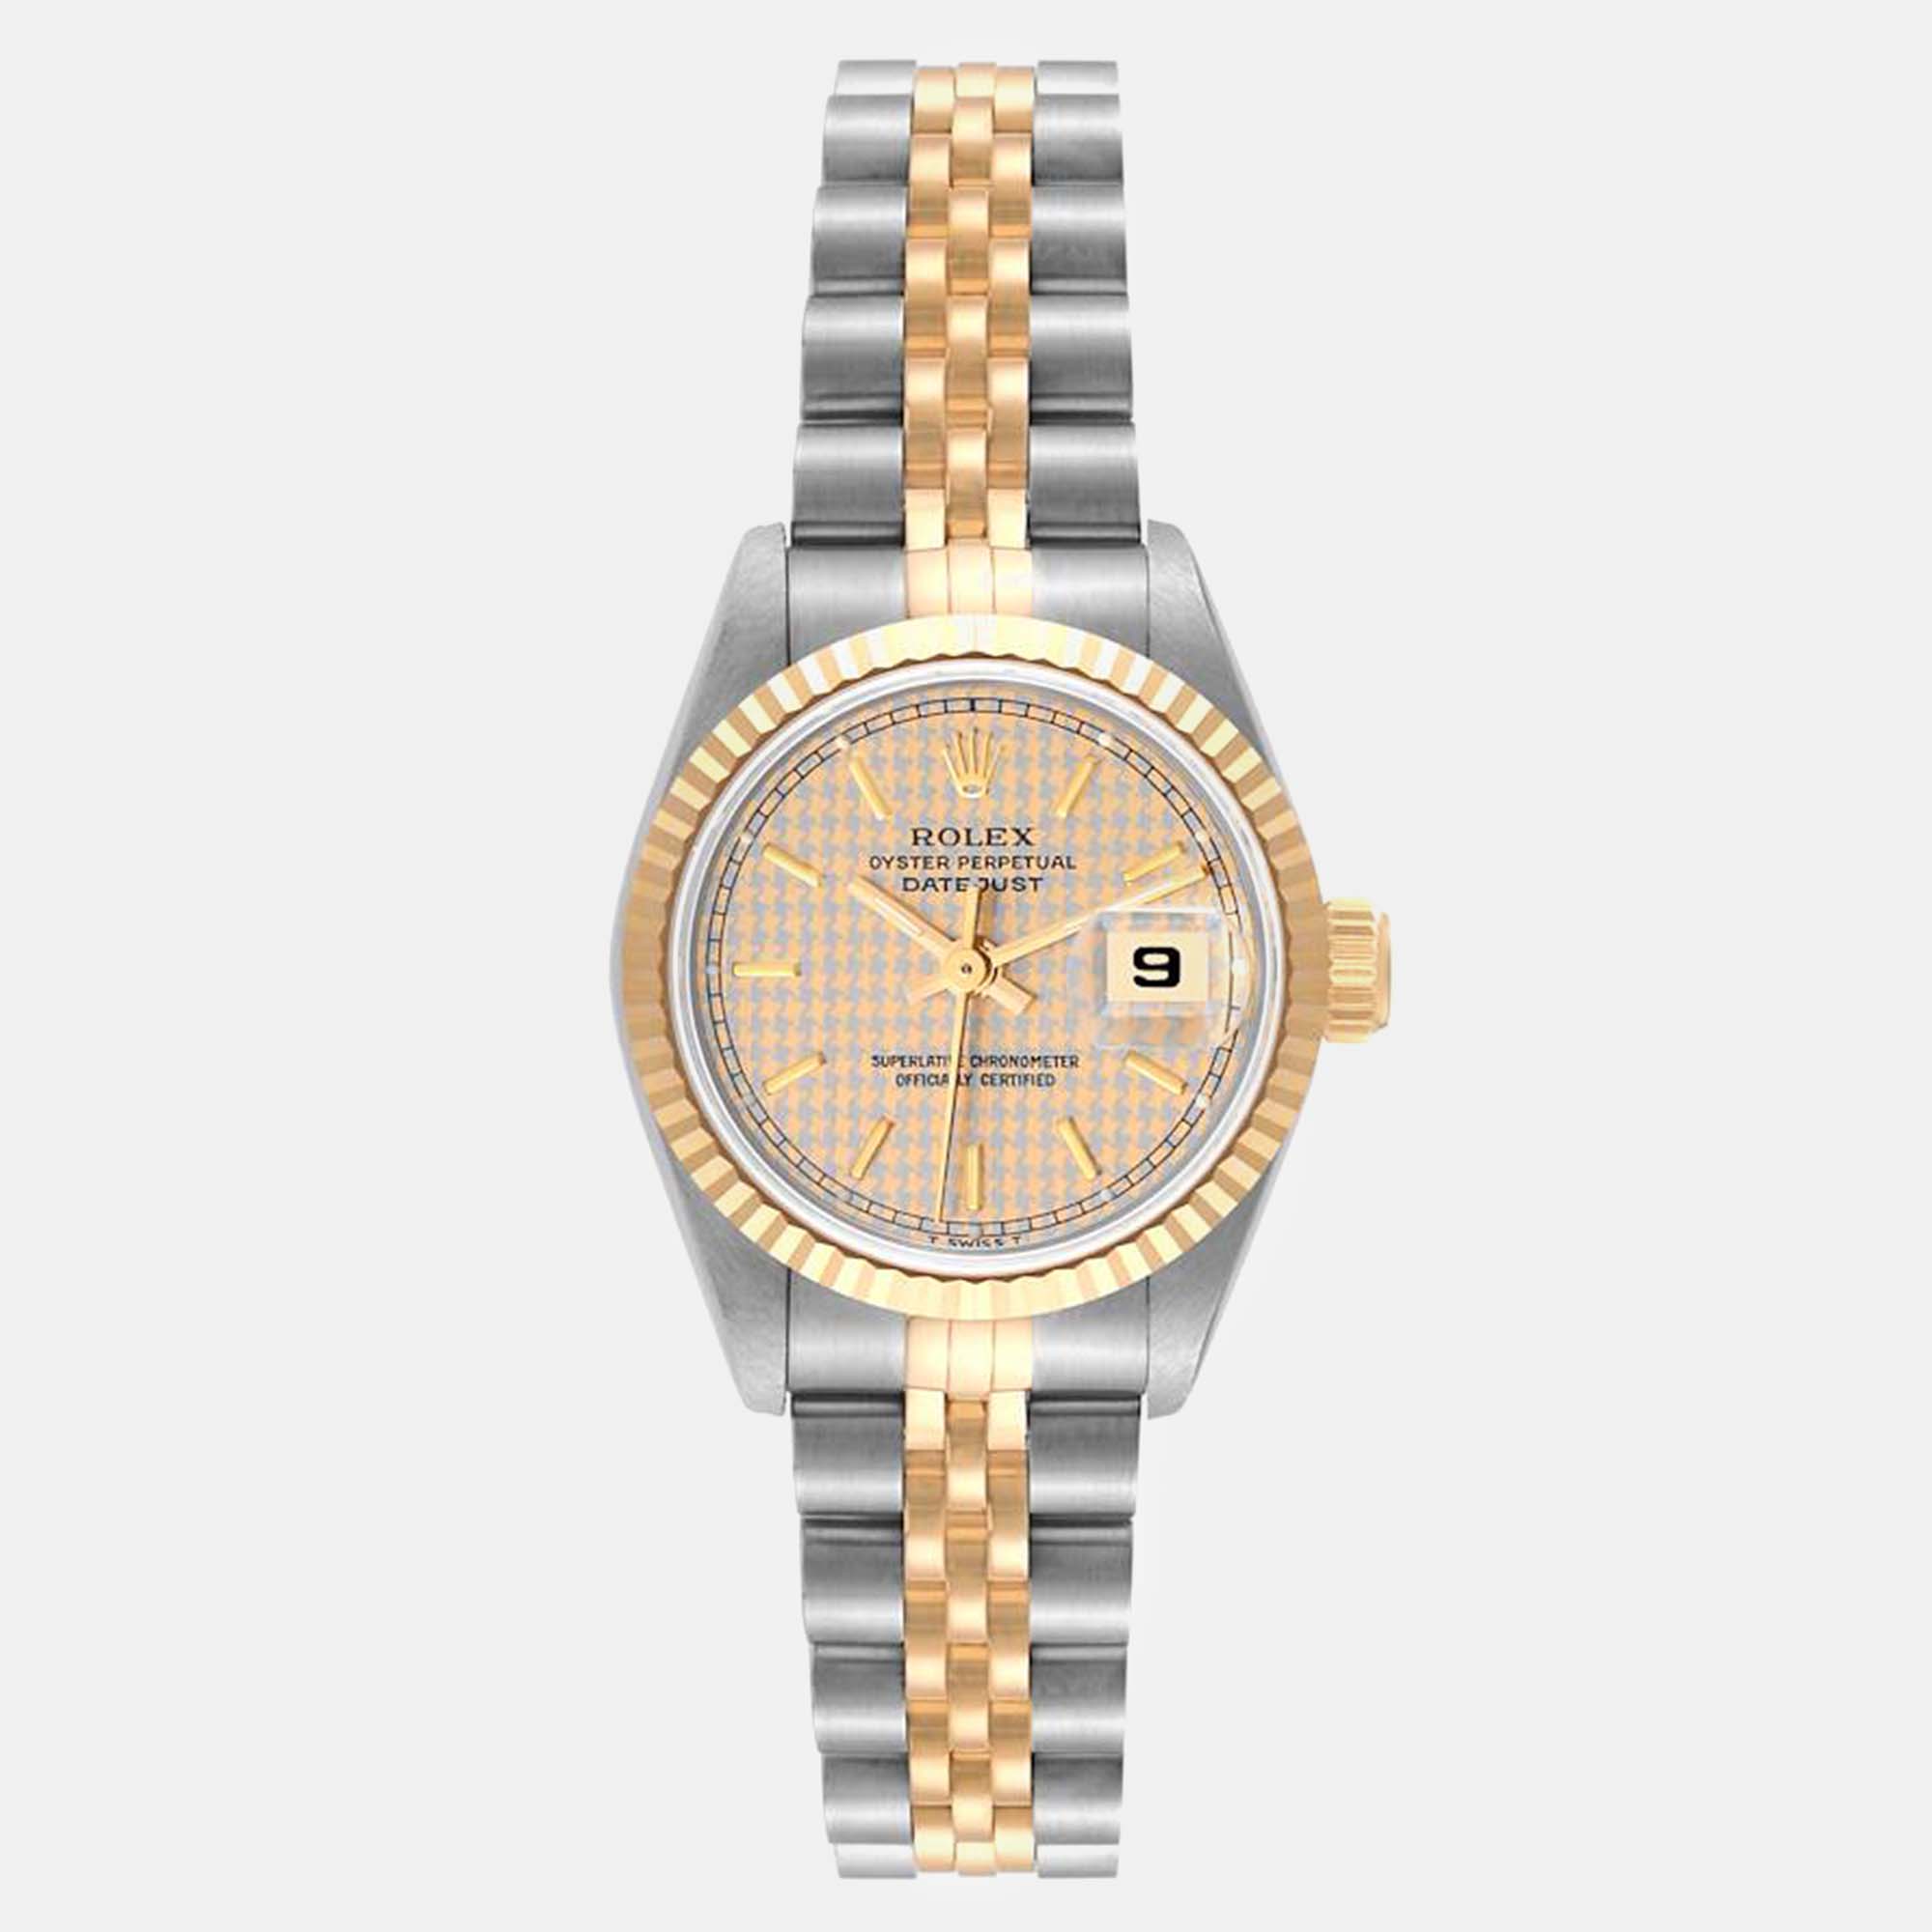 Rolex datejust steel yellow gold houndstooth dial ladies watch 26 mm